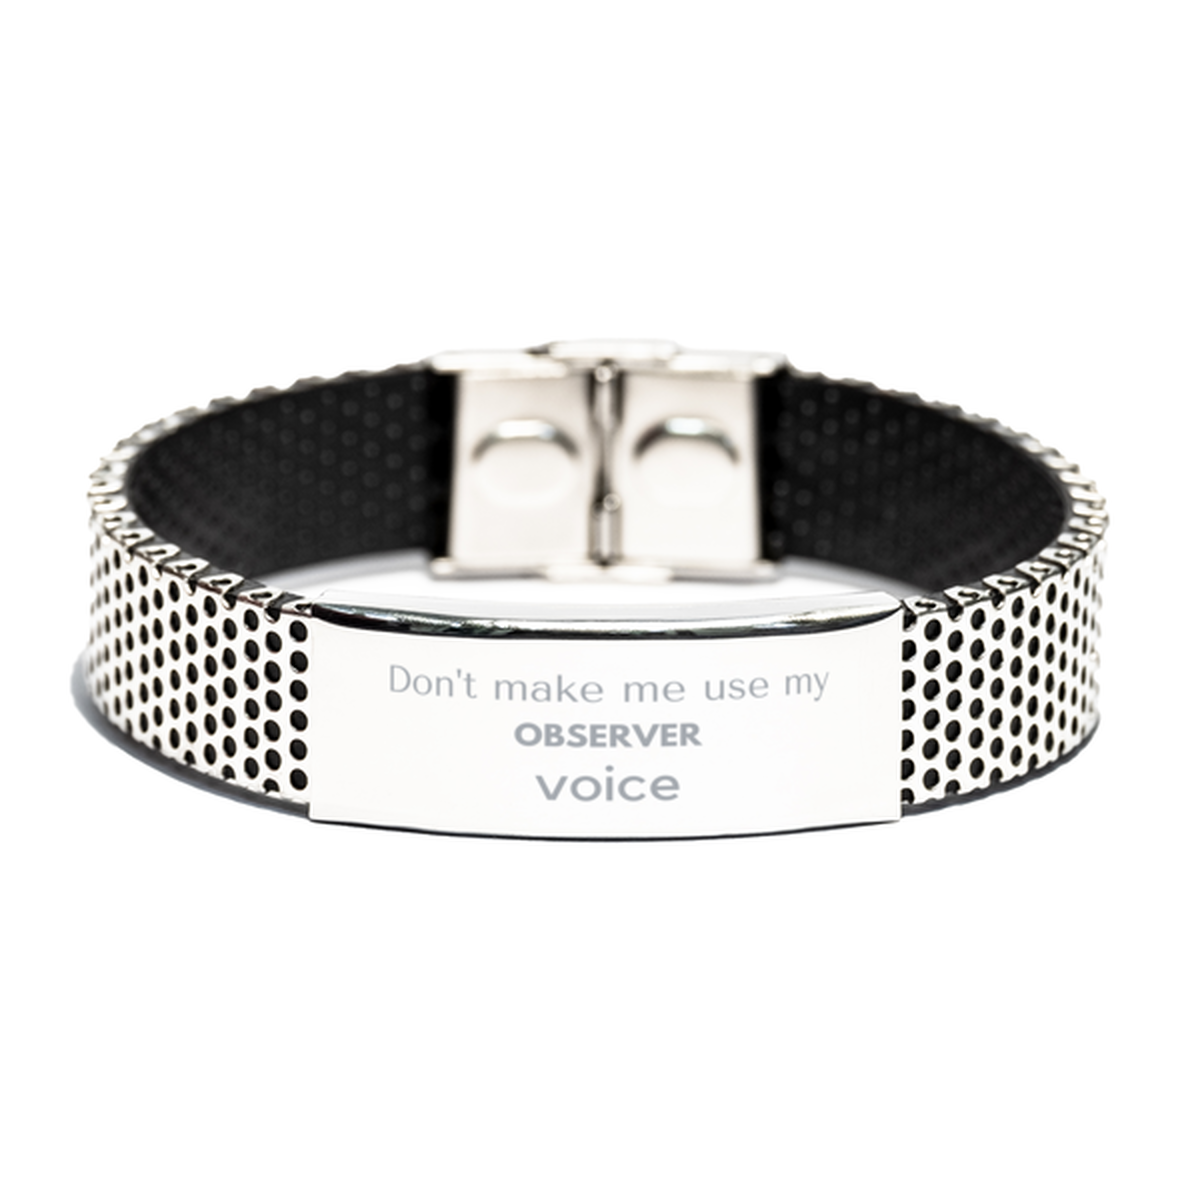 Don't make me use my Observer voice, Sarcasm Observer Gifts, Christmas Observer Stainless Steel Bracelet Birthday Unique Gifts For Observer Coworkers, Men, Women, Colleague, Friends